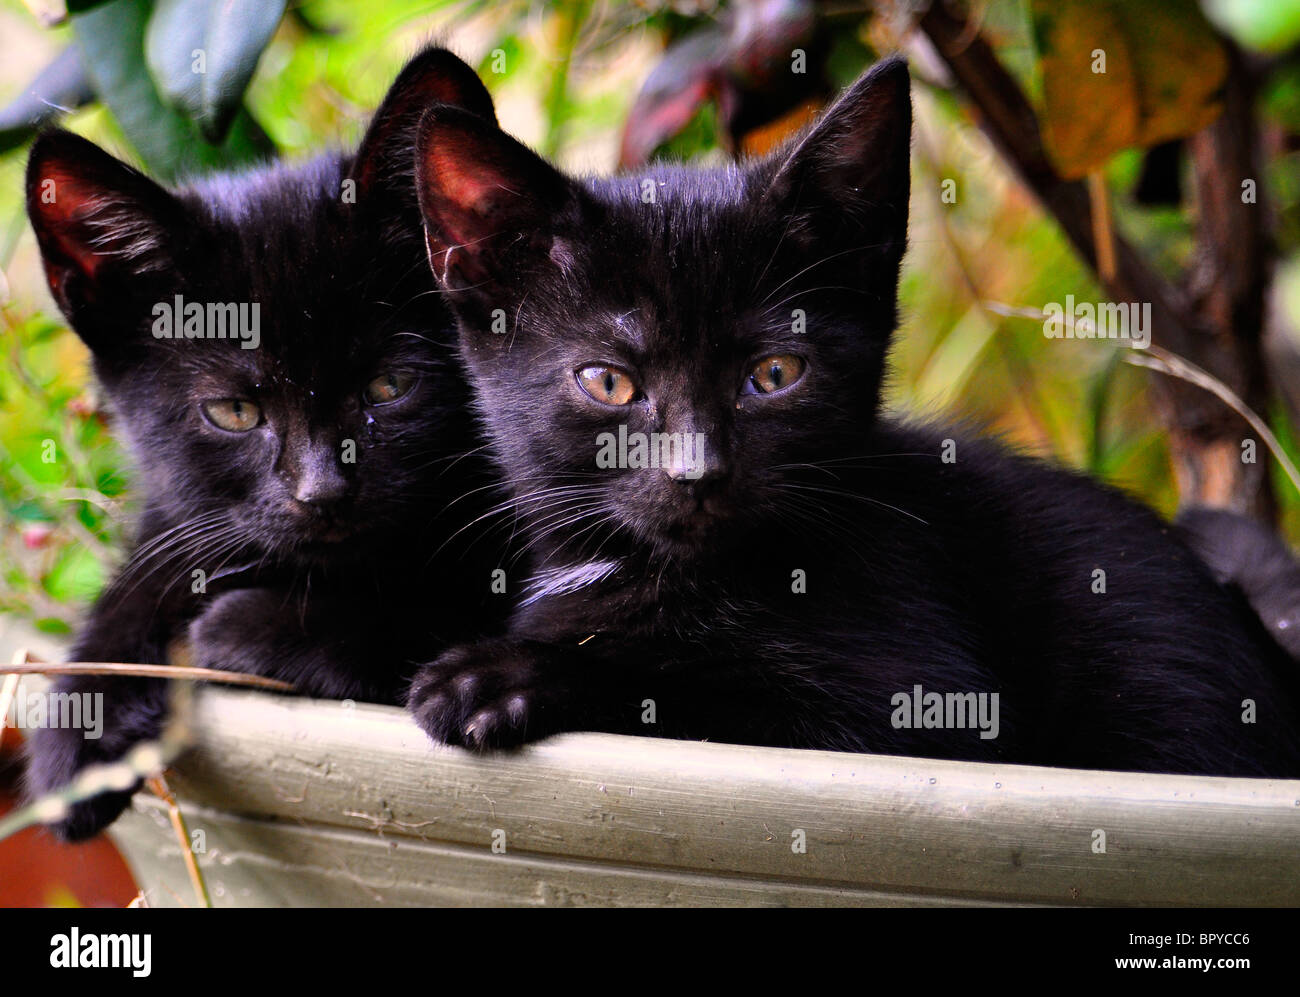 Feral Black kittens resting in a plant pot Stock Photo